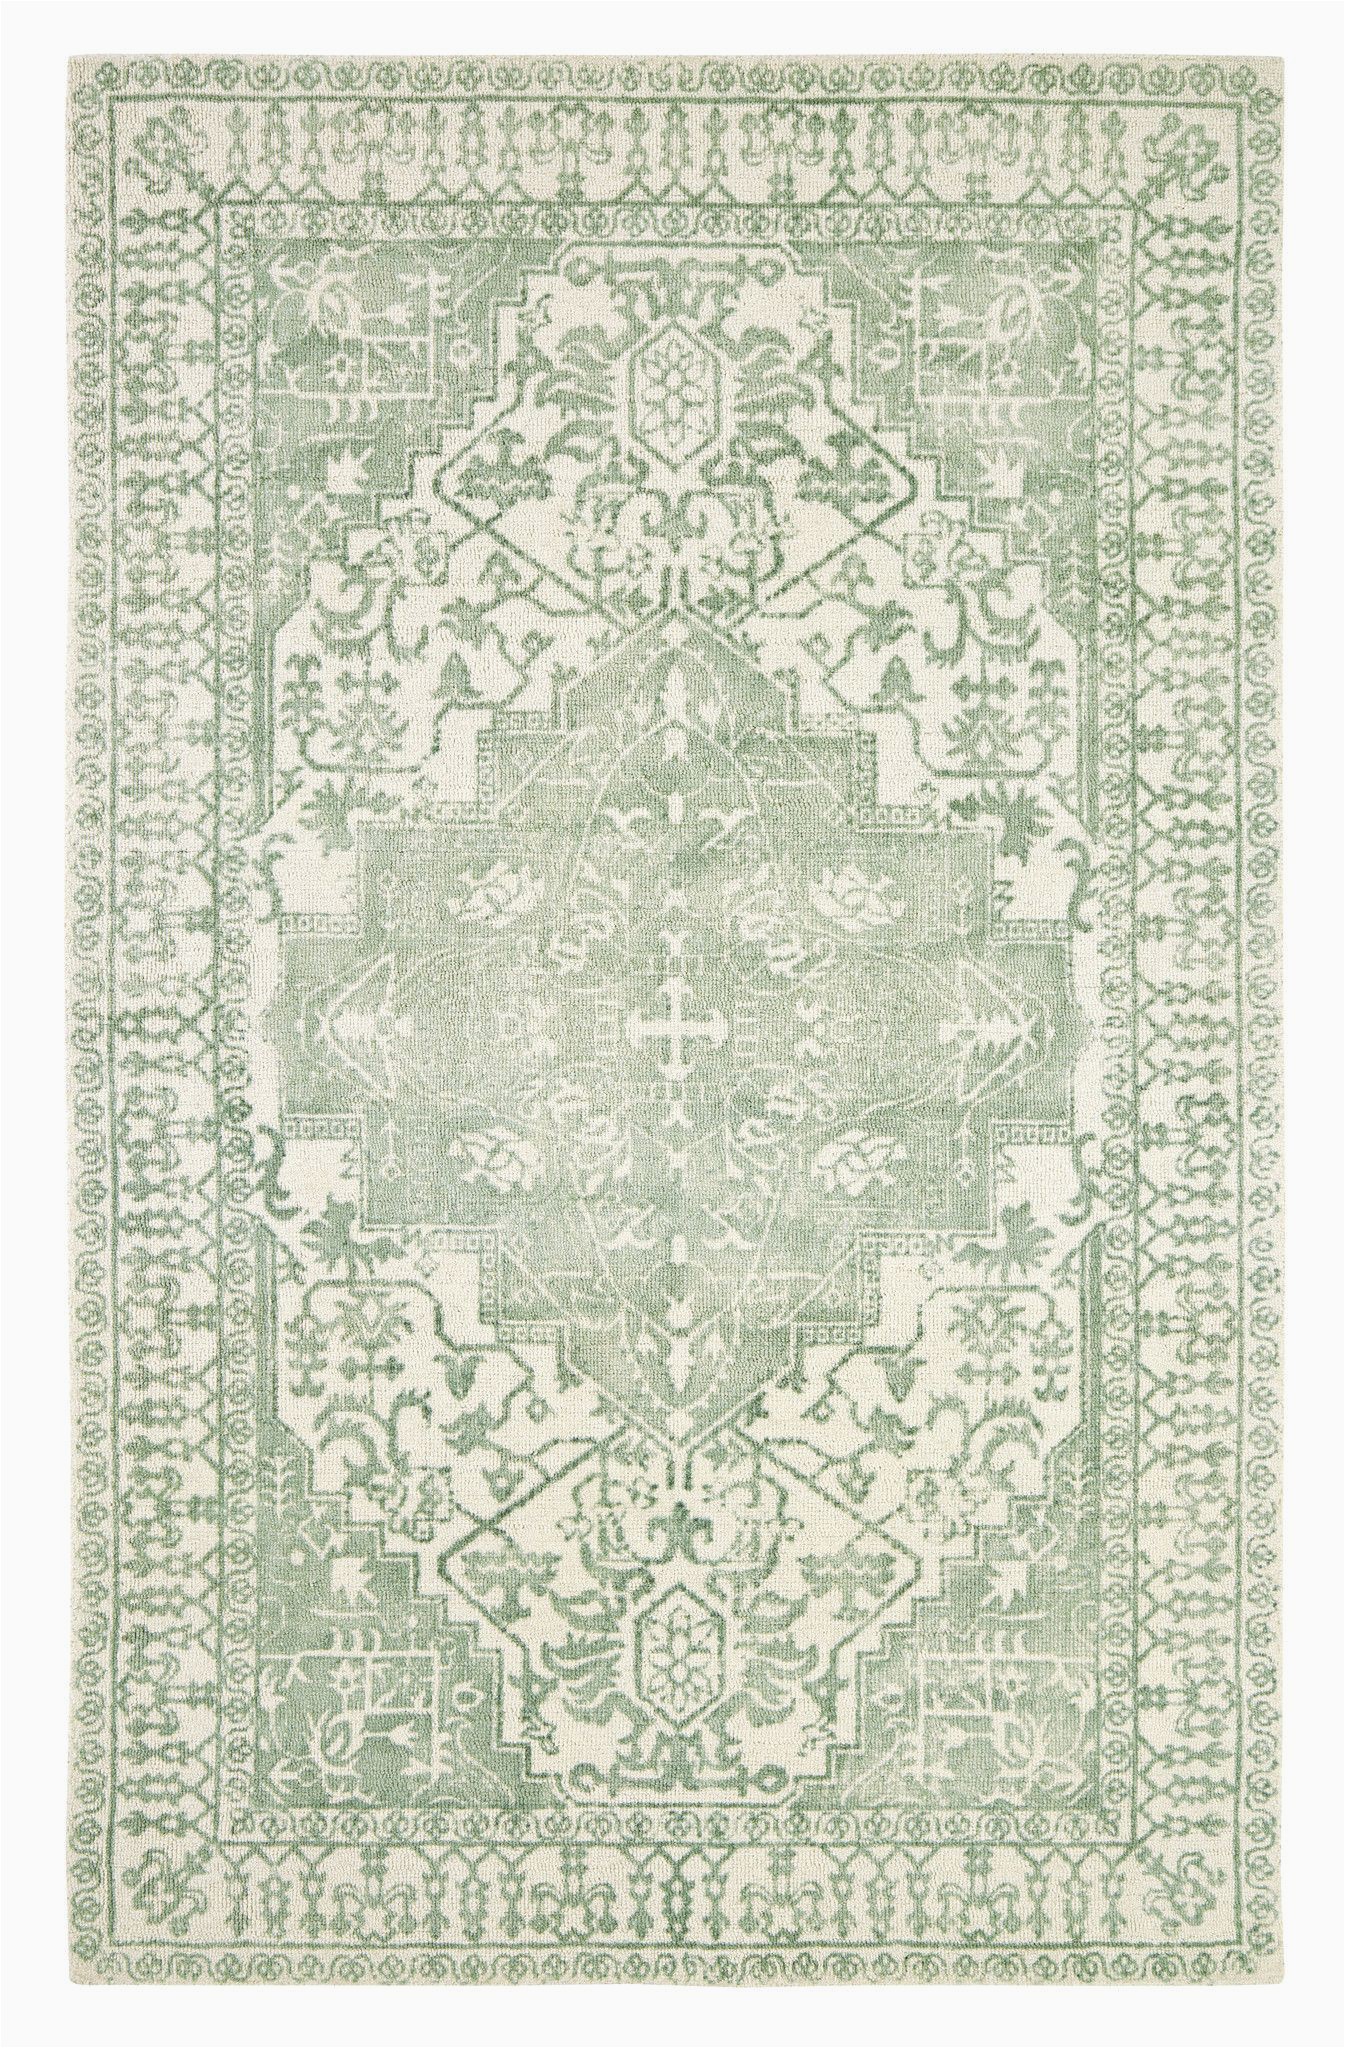 Sage Green area Rugs Target Bringing Fashion forward Designs to A Great Price Point